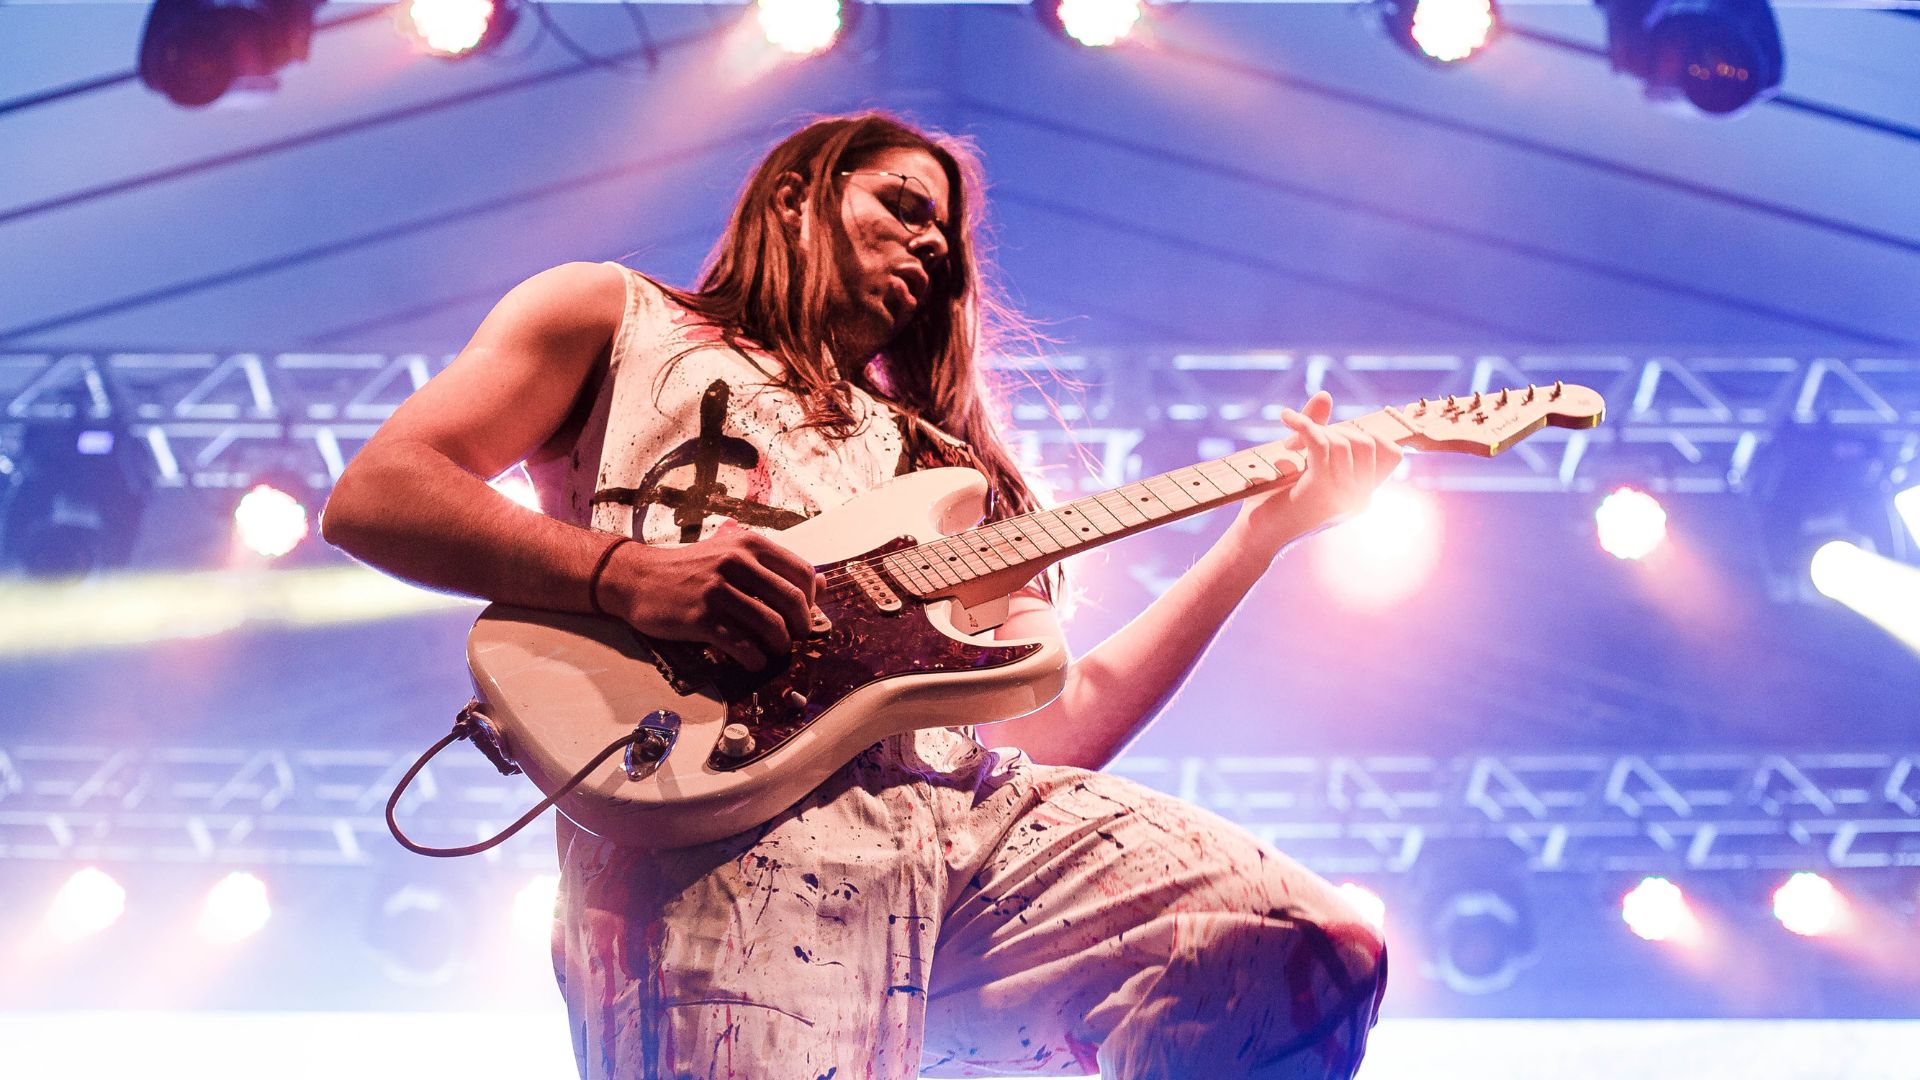 a person with long hair playing an electric guitar